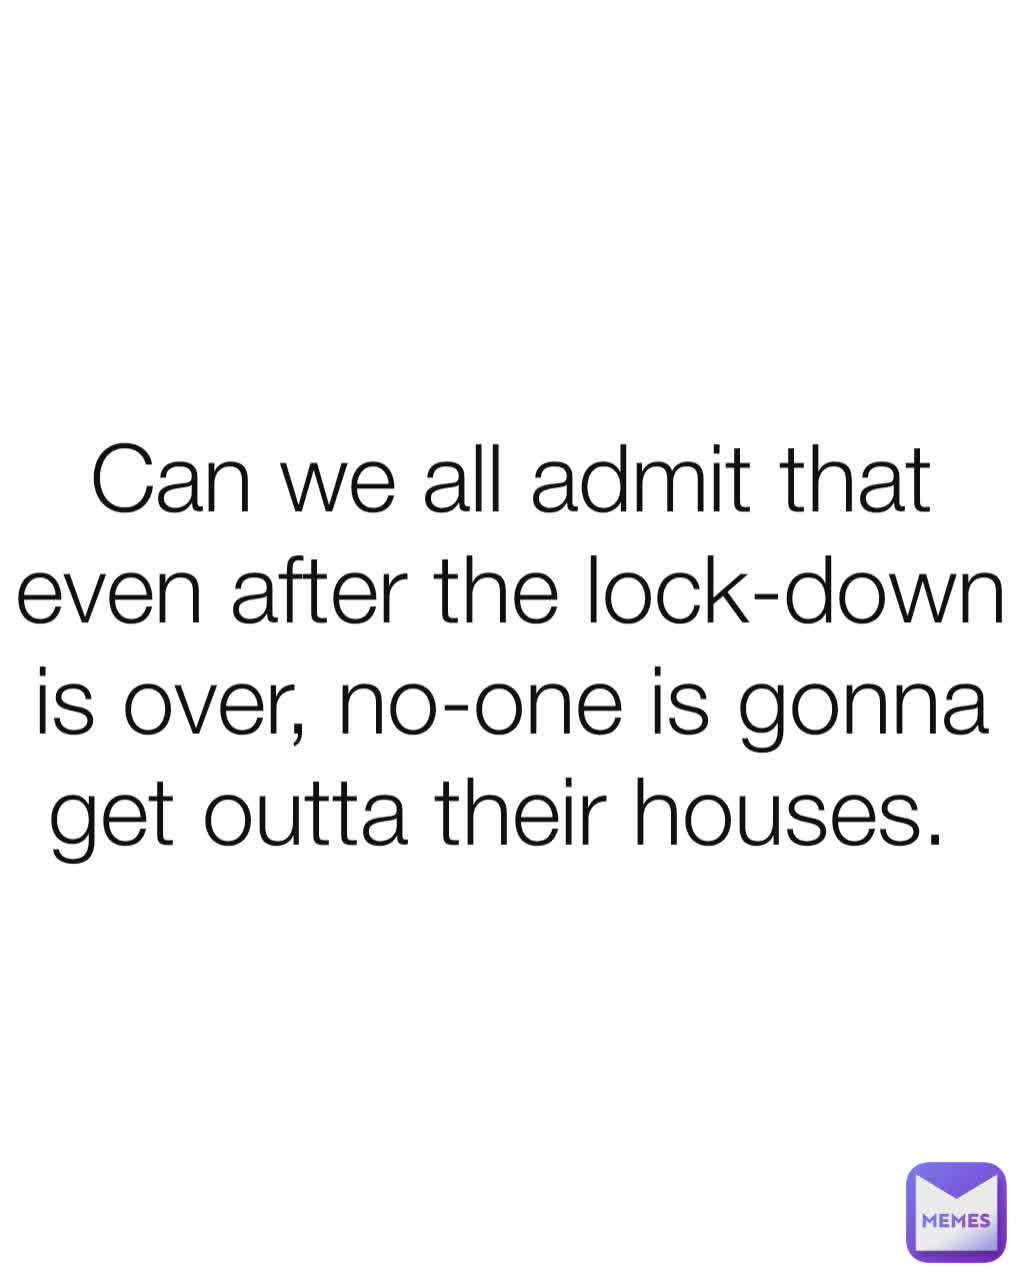 Can we all admit that even after the lock-down is over, no-one is gonna get outta their houses. 